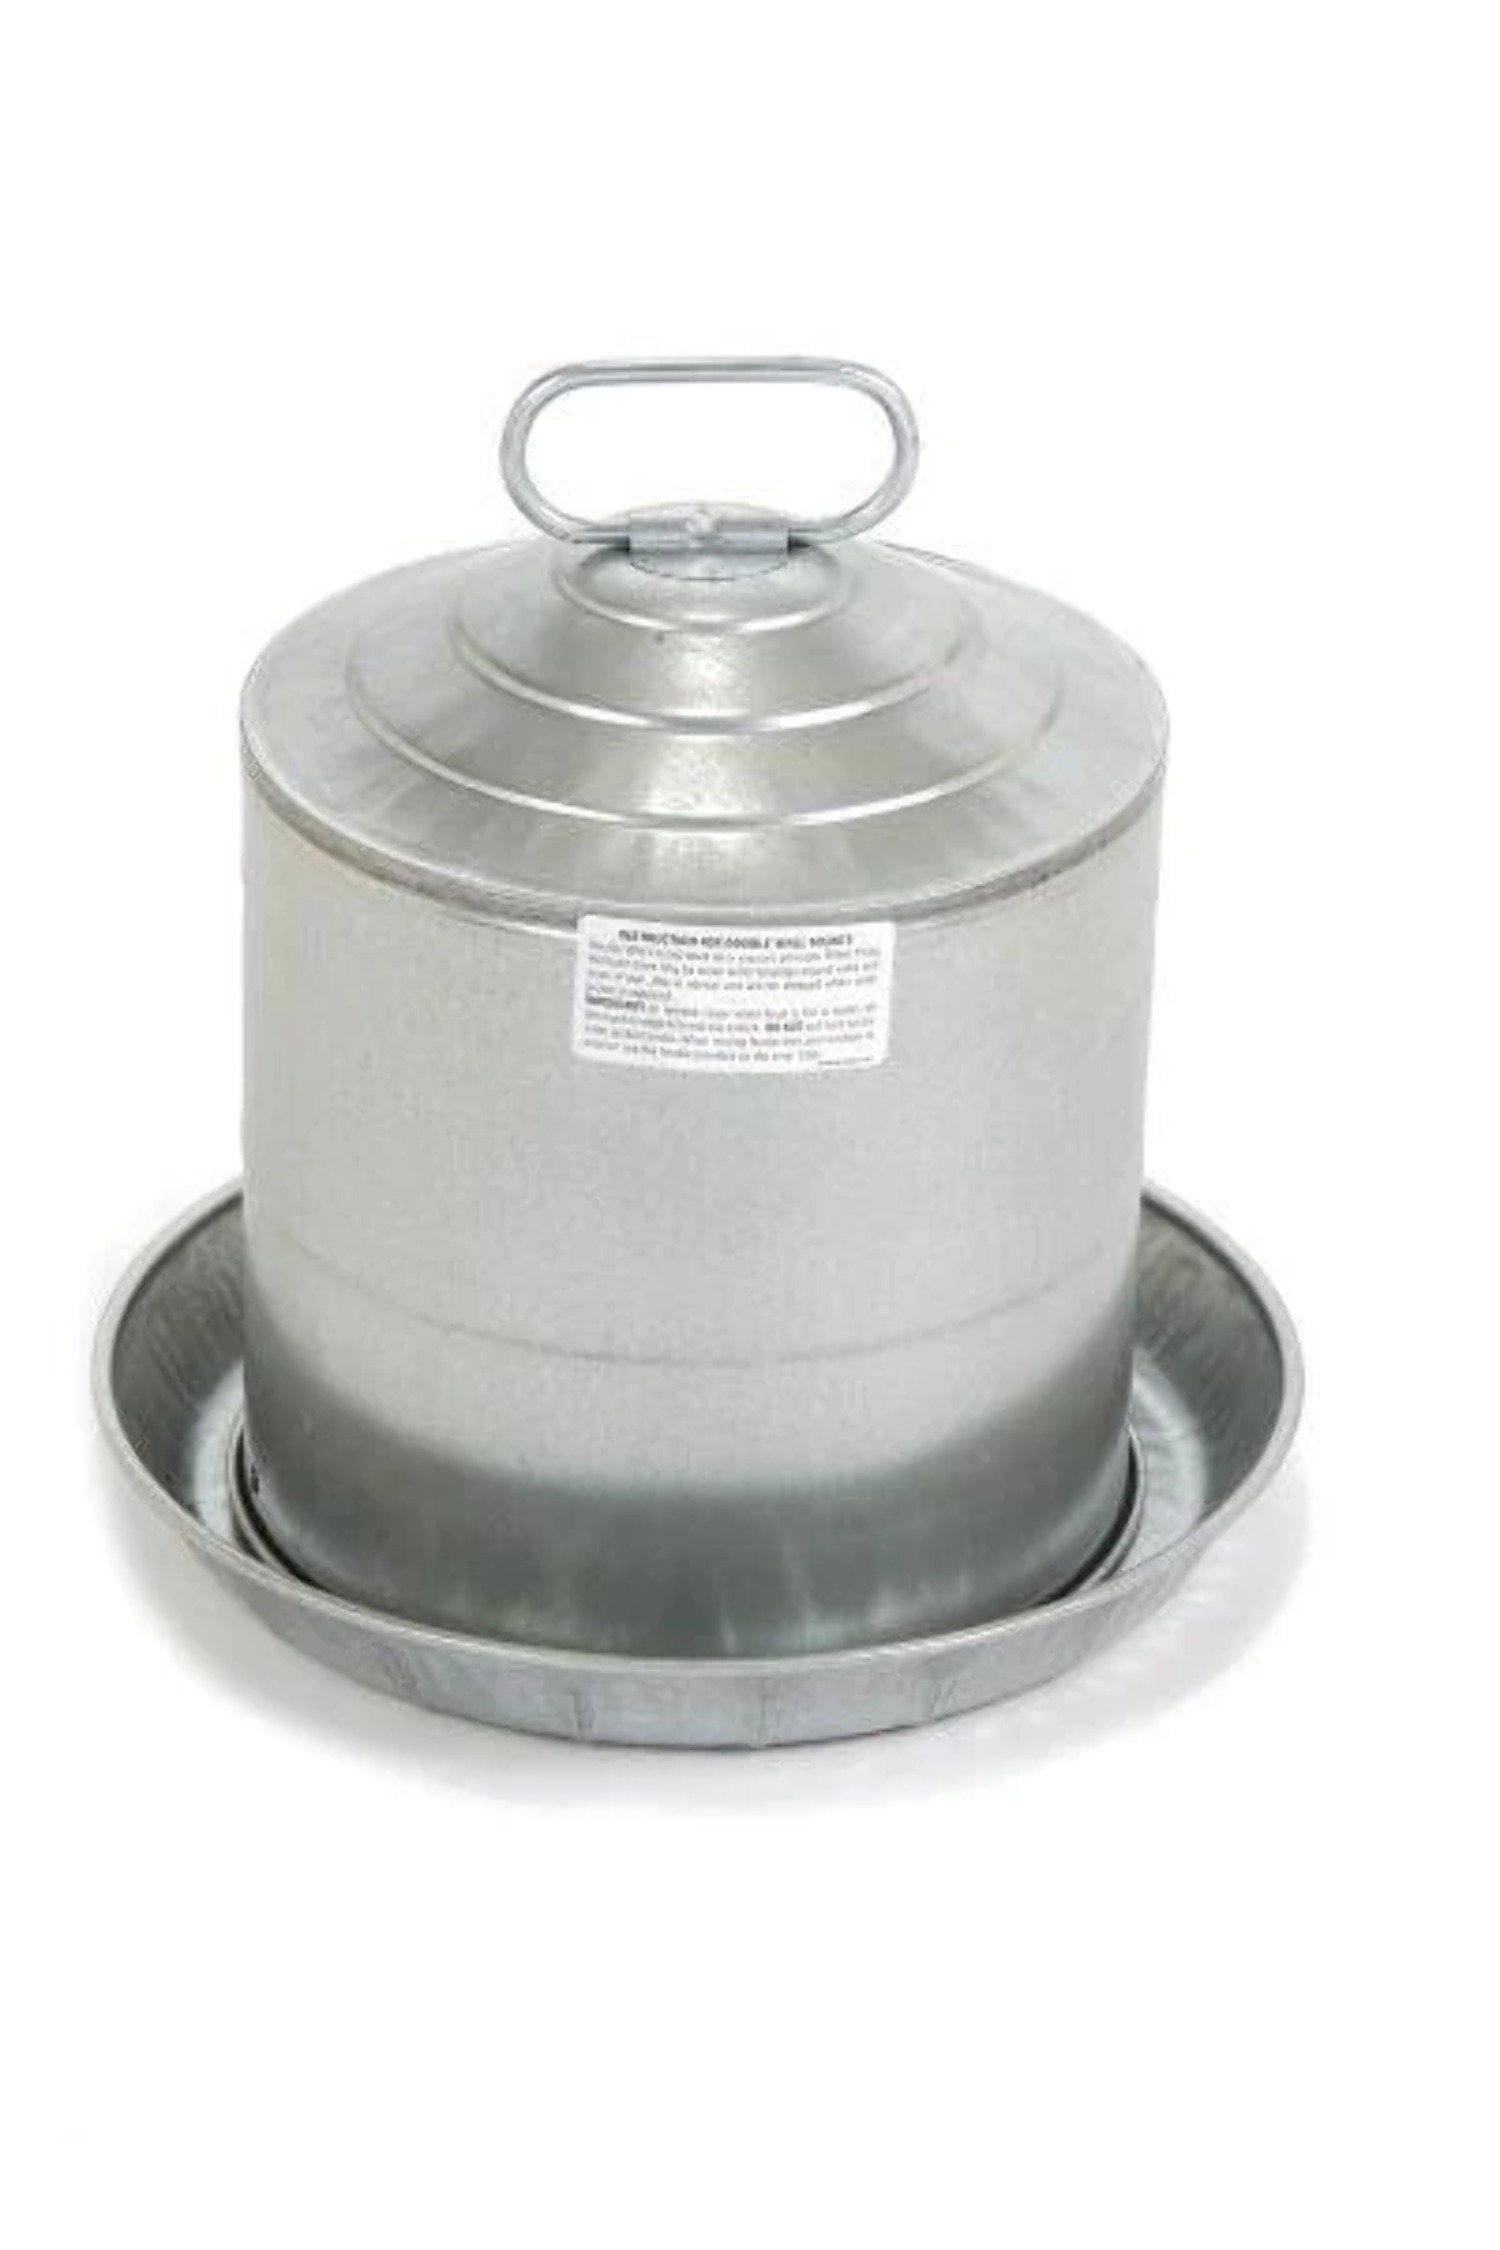 Little Giant Double Wall Metal Poultry Fount 2 Gallon - image 2 of 4